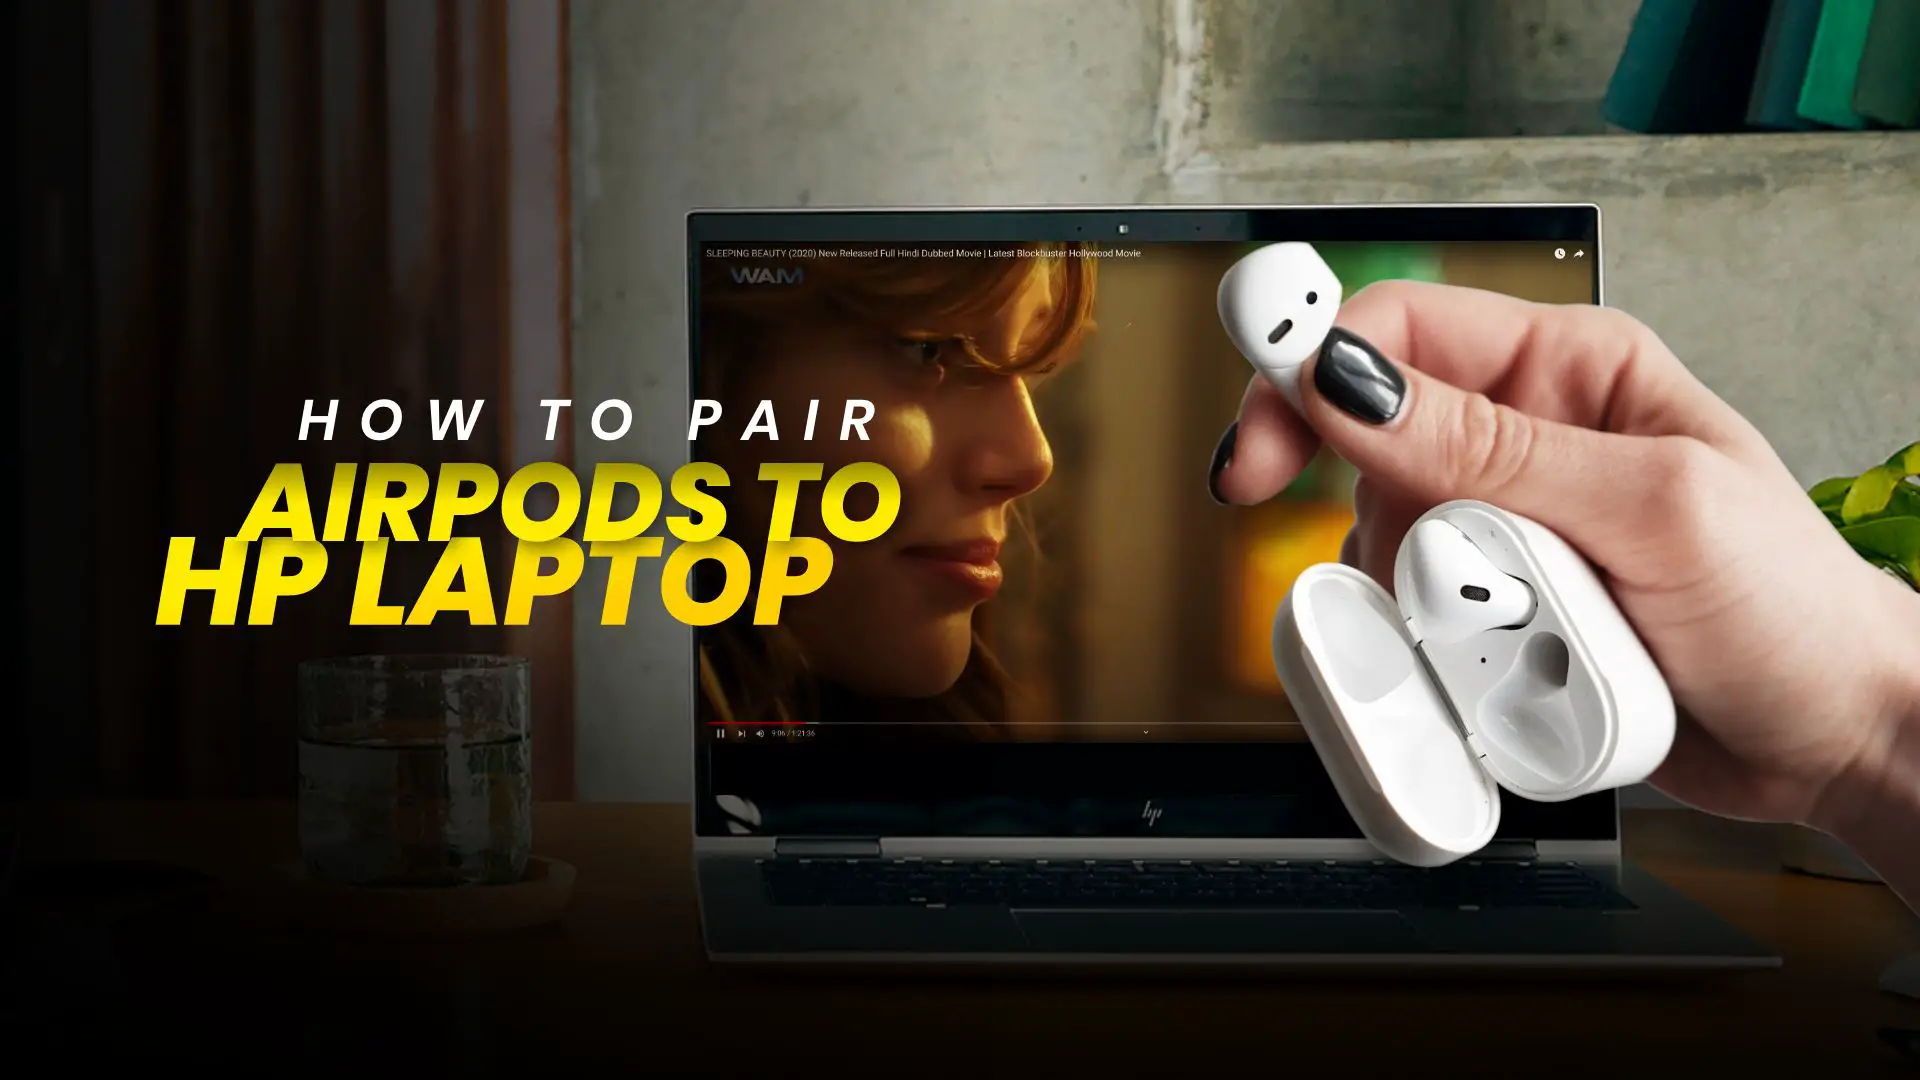 How to Pair AirPods to HP Laptop step by step guide